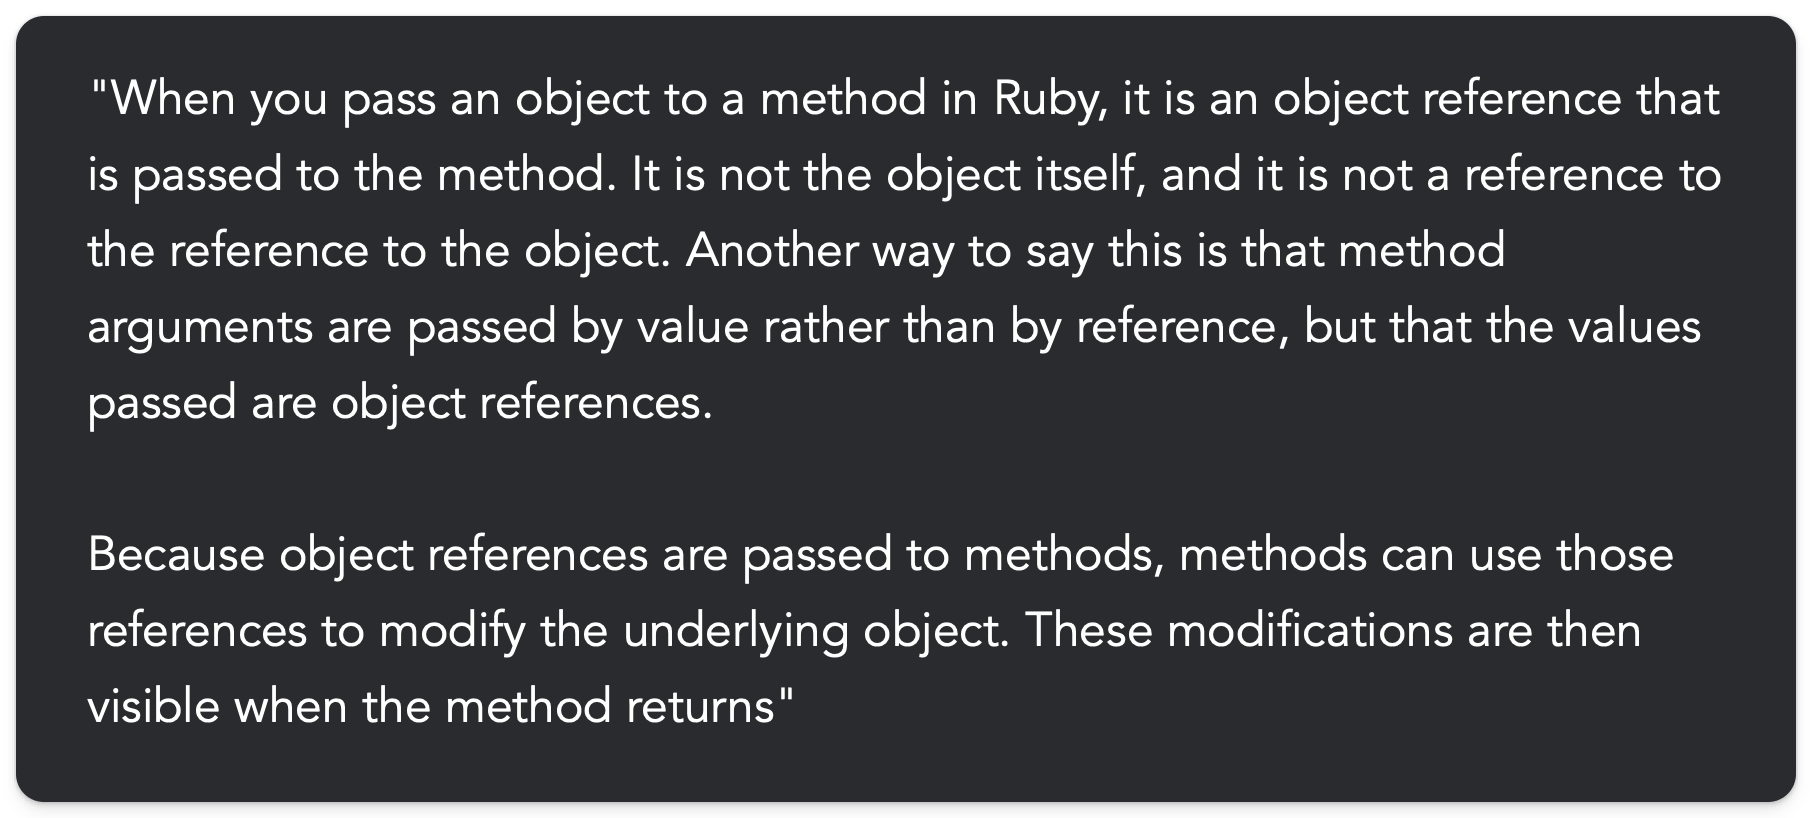 "When you pass an object to a method in Ruby, it is an object reference that is passed to the method. It is not the object itself, and it is not a reference to the reference to the object. Another way to say this is that method arguments are passed by value rather than by reference, but that the values passed are object references.  Because object references are passed to methods, methods can use those references to modify the underlying object. These modifications are then visible when the method returns"